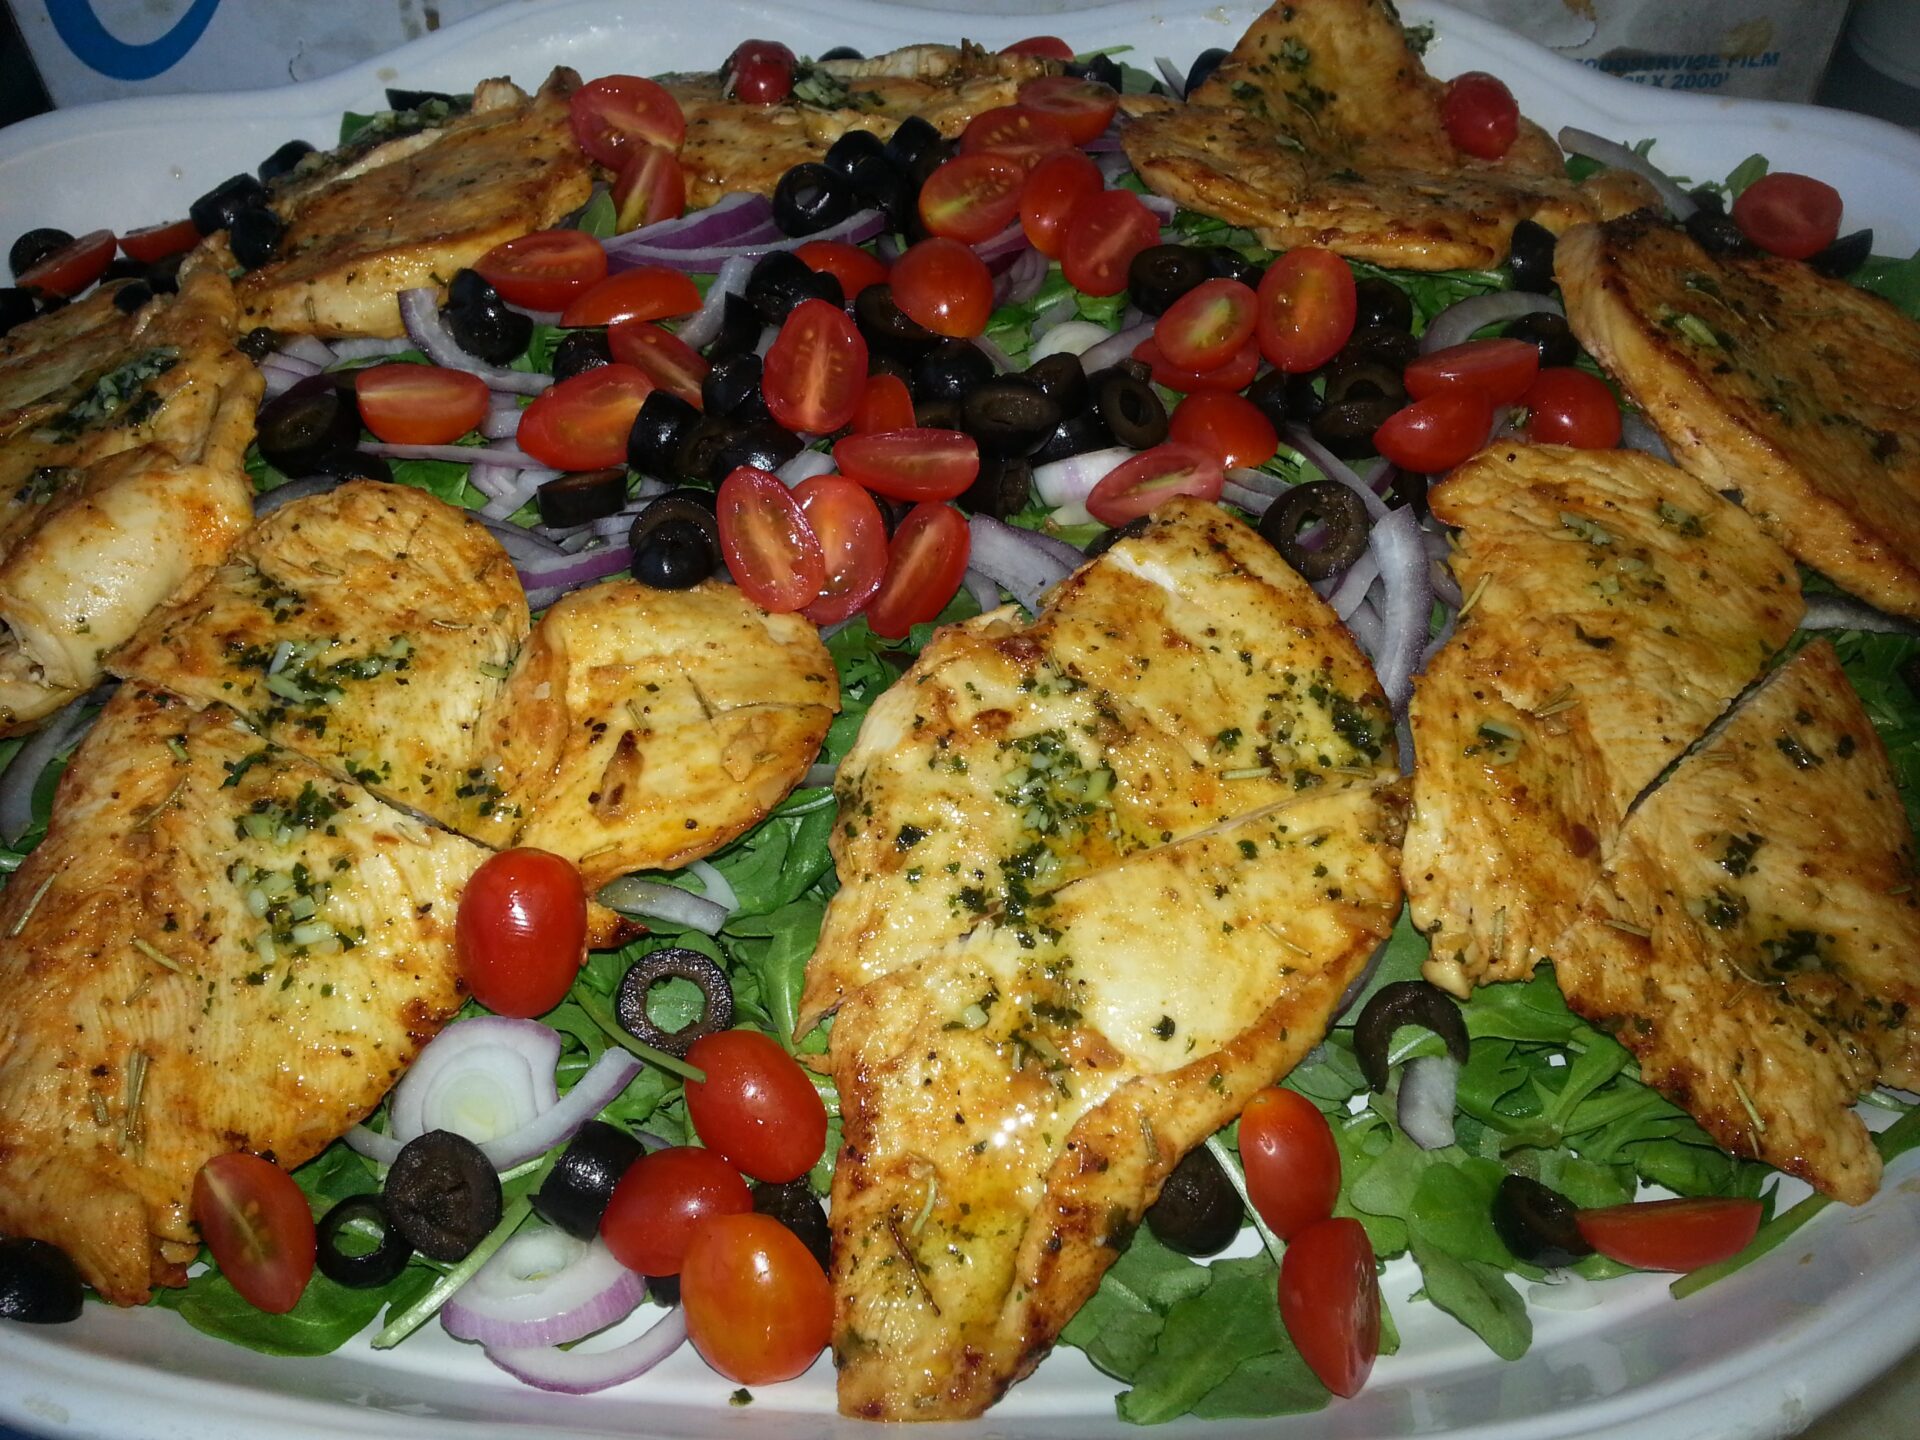 A plate of food with chicken, tomatoes and olives.